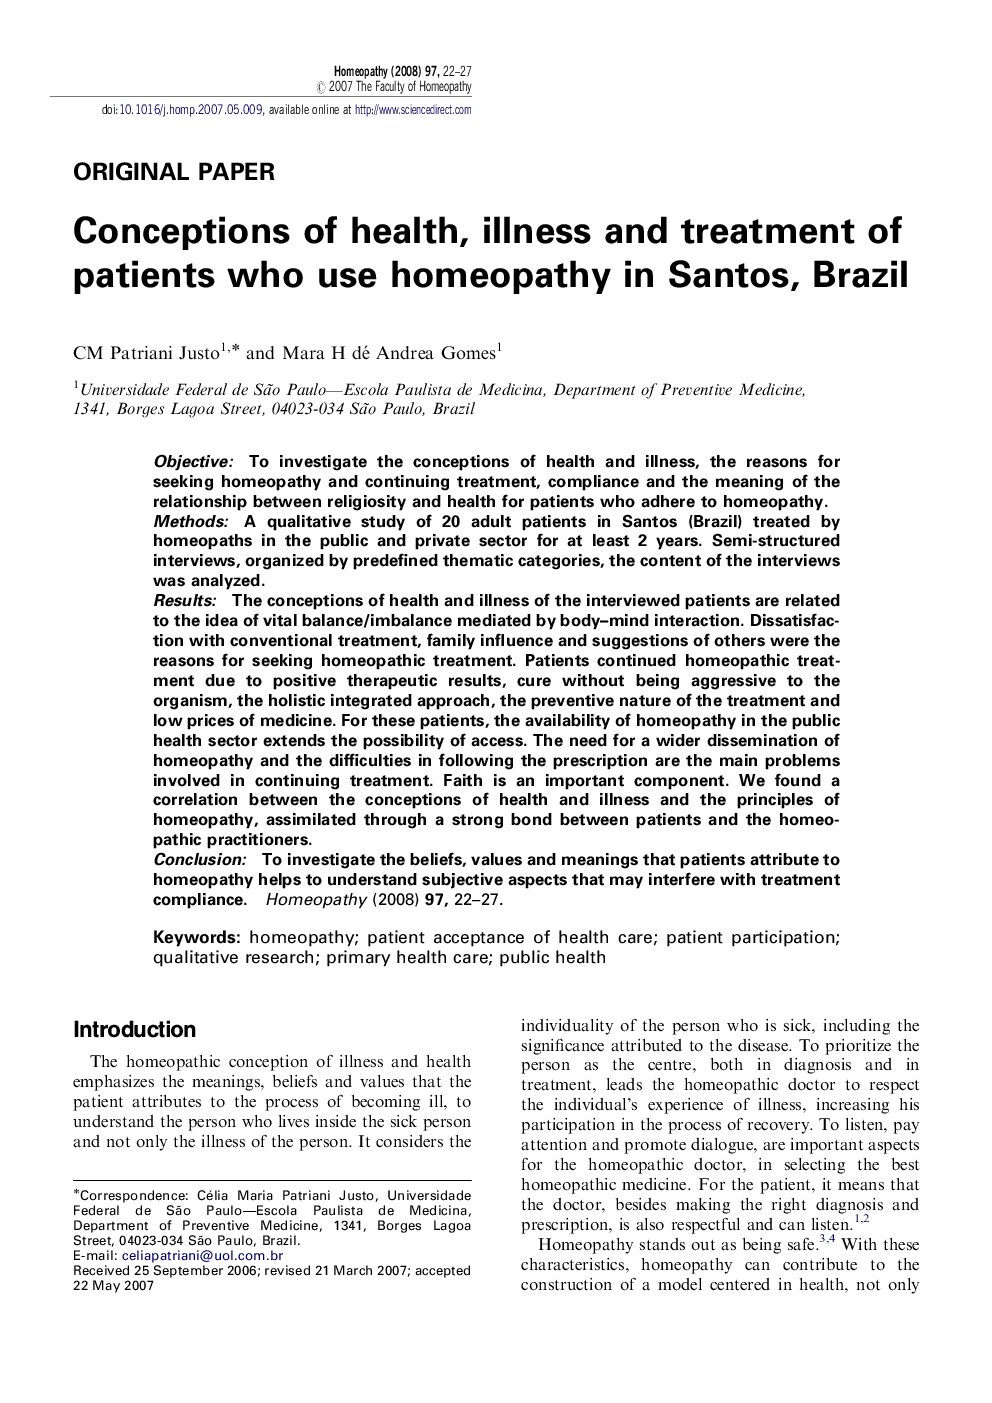 Conceptions of health, illness and treatment of patients who use homeopathy in Santos, Brazil